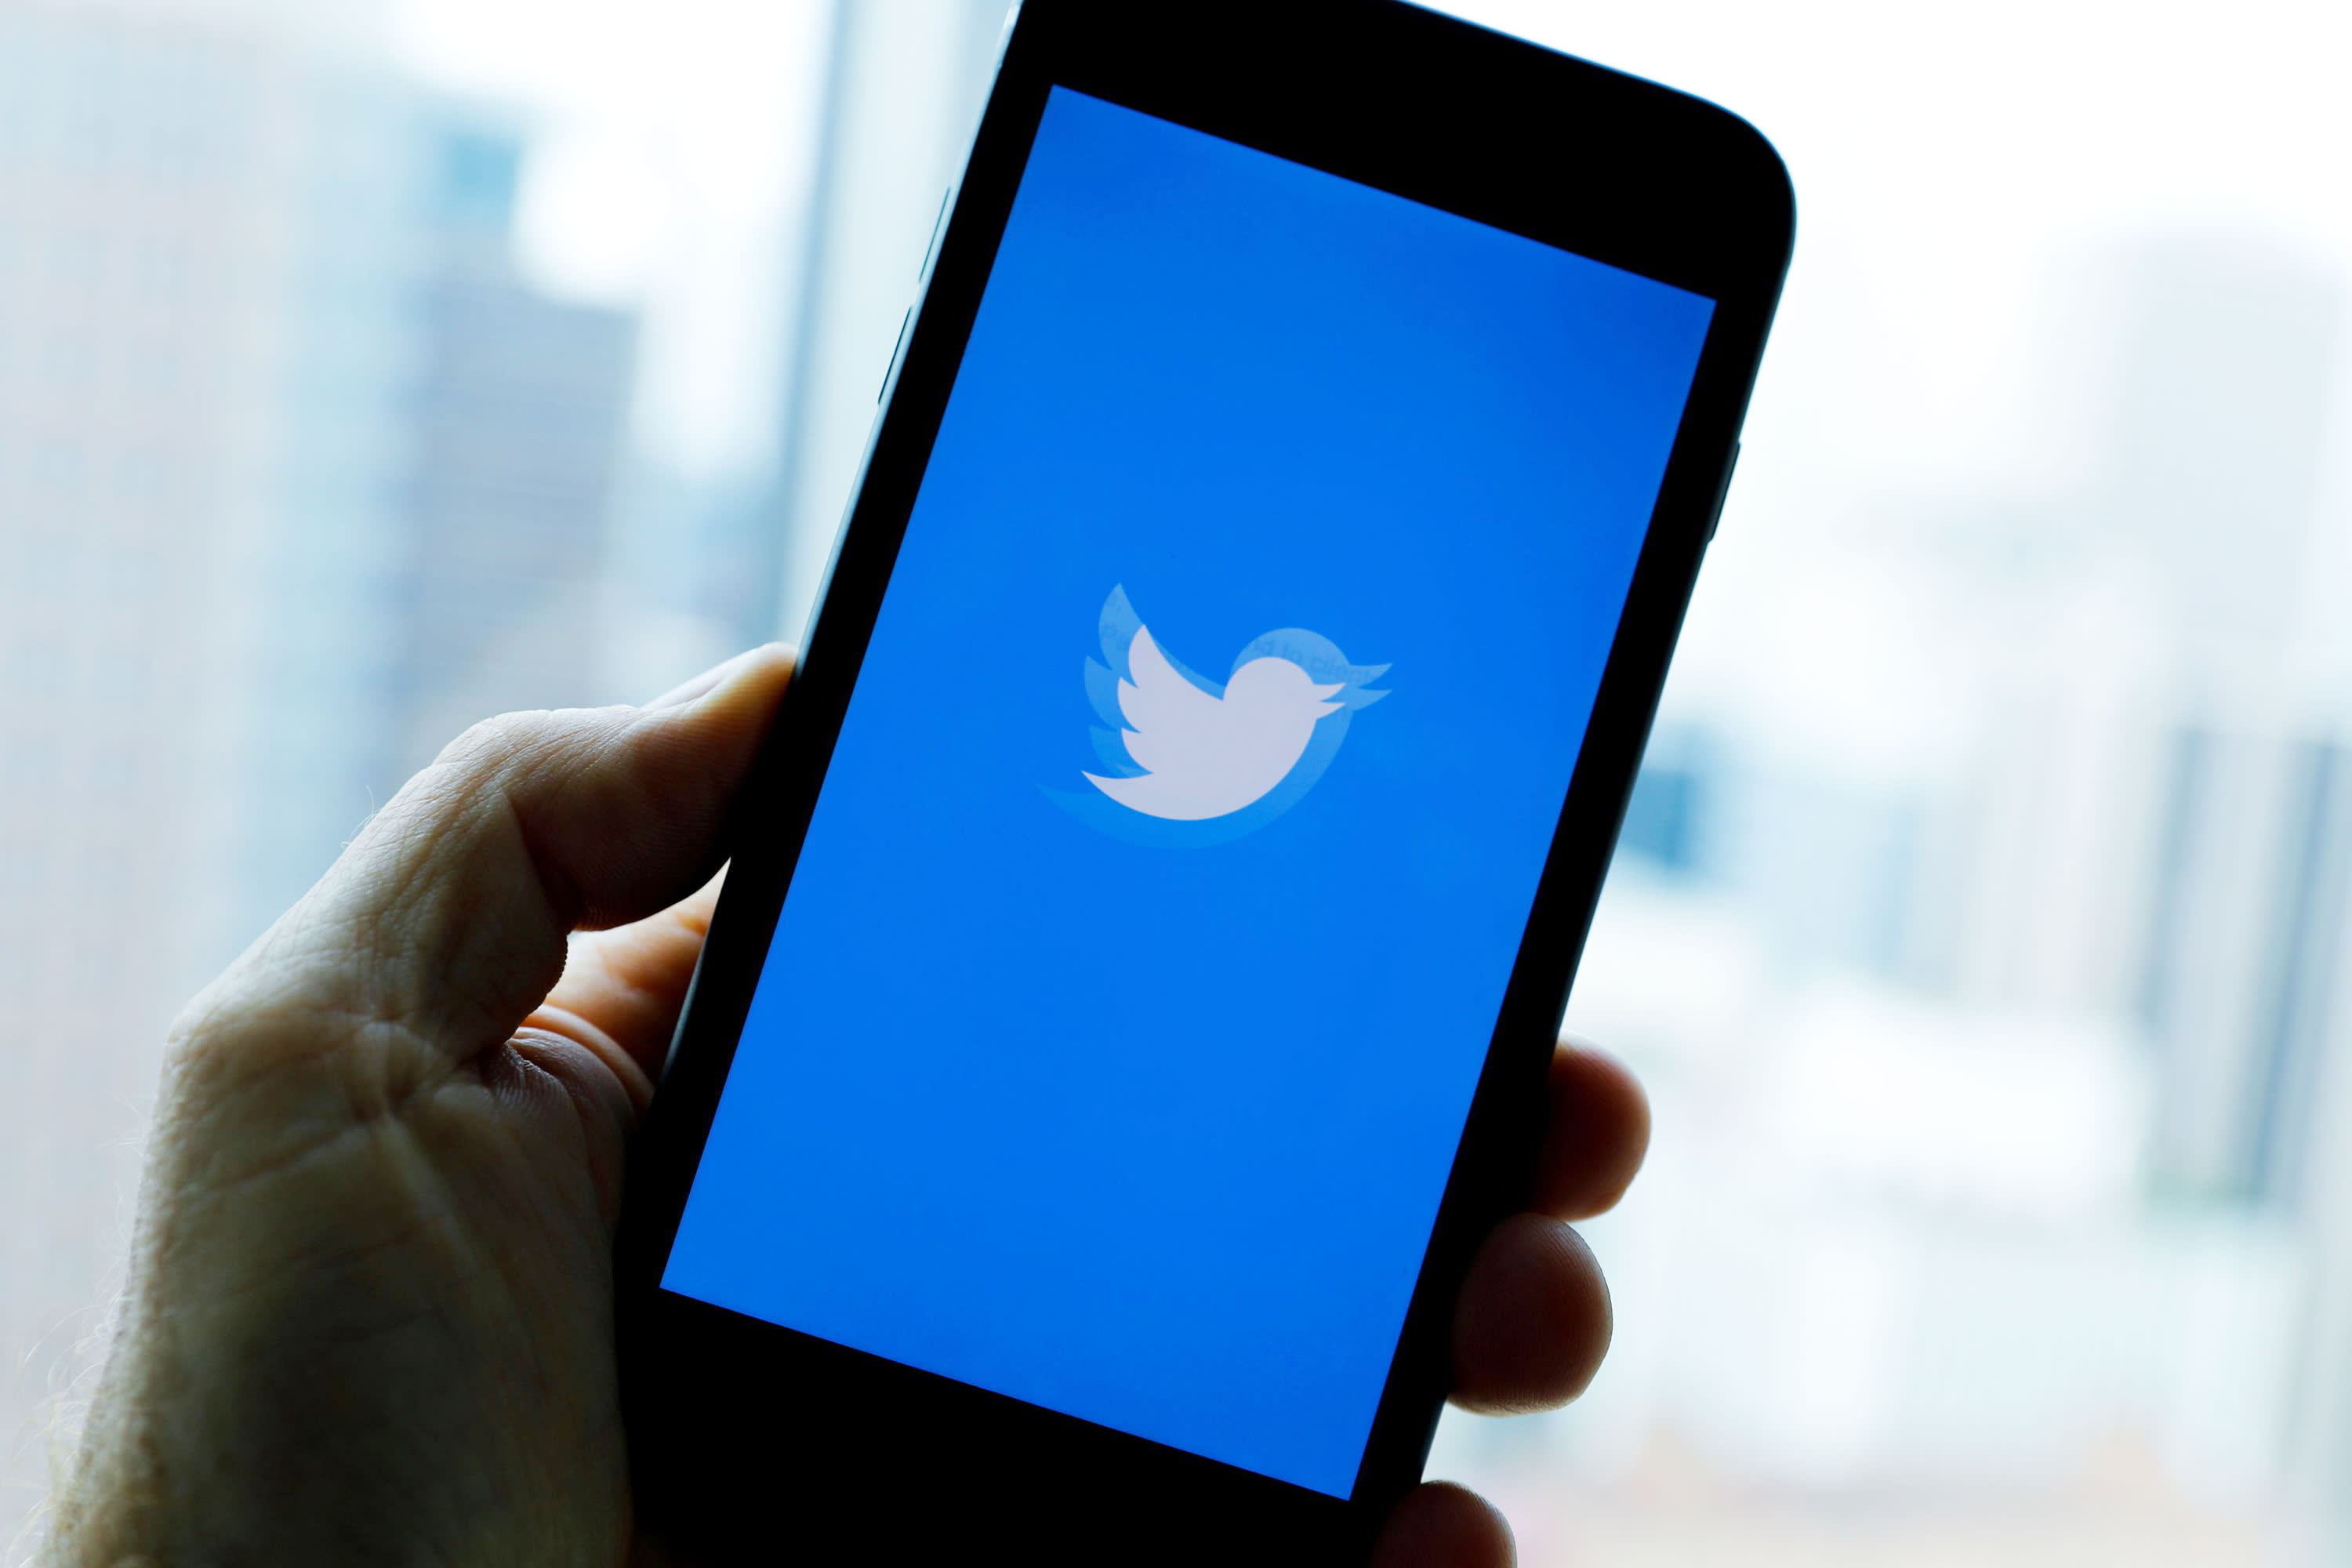 India rebukes Twitter for not fully complying with government order